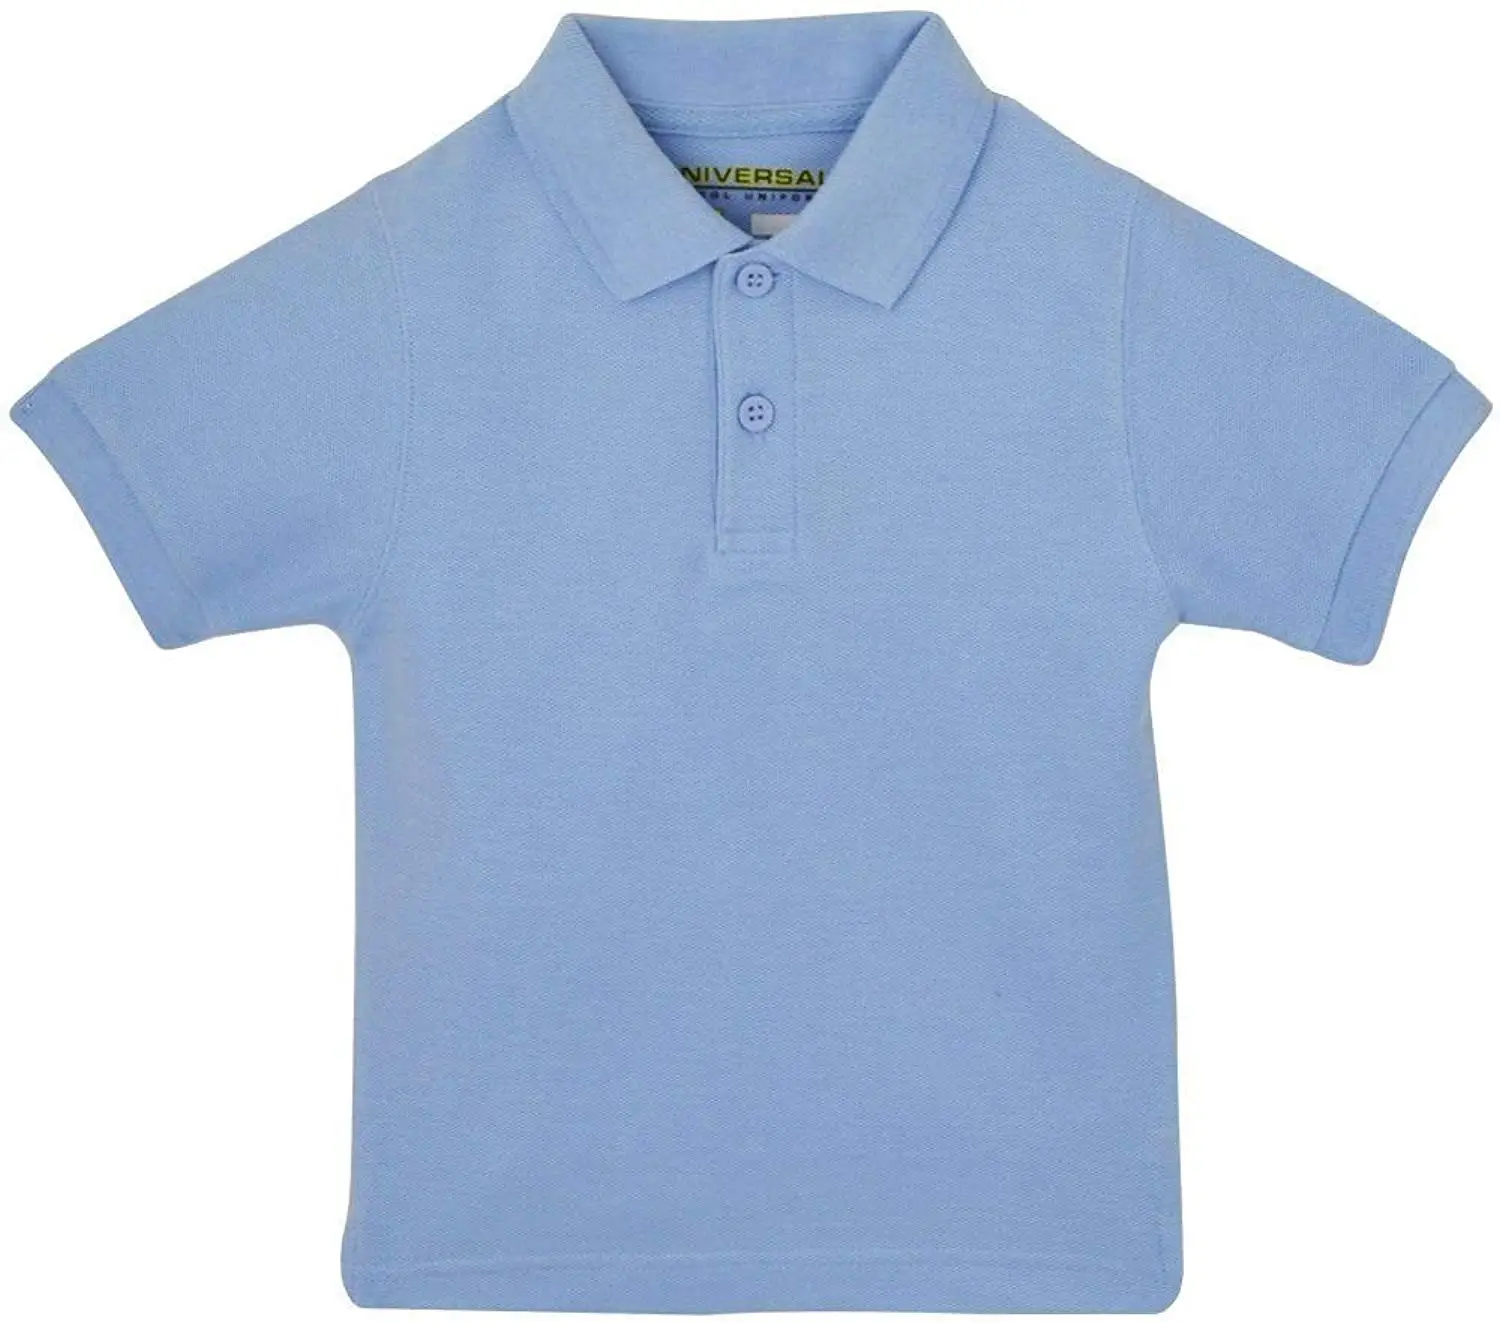 Cheap Polo Kids, find Polo Kids deals on line at Alibaba.com